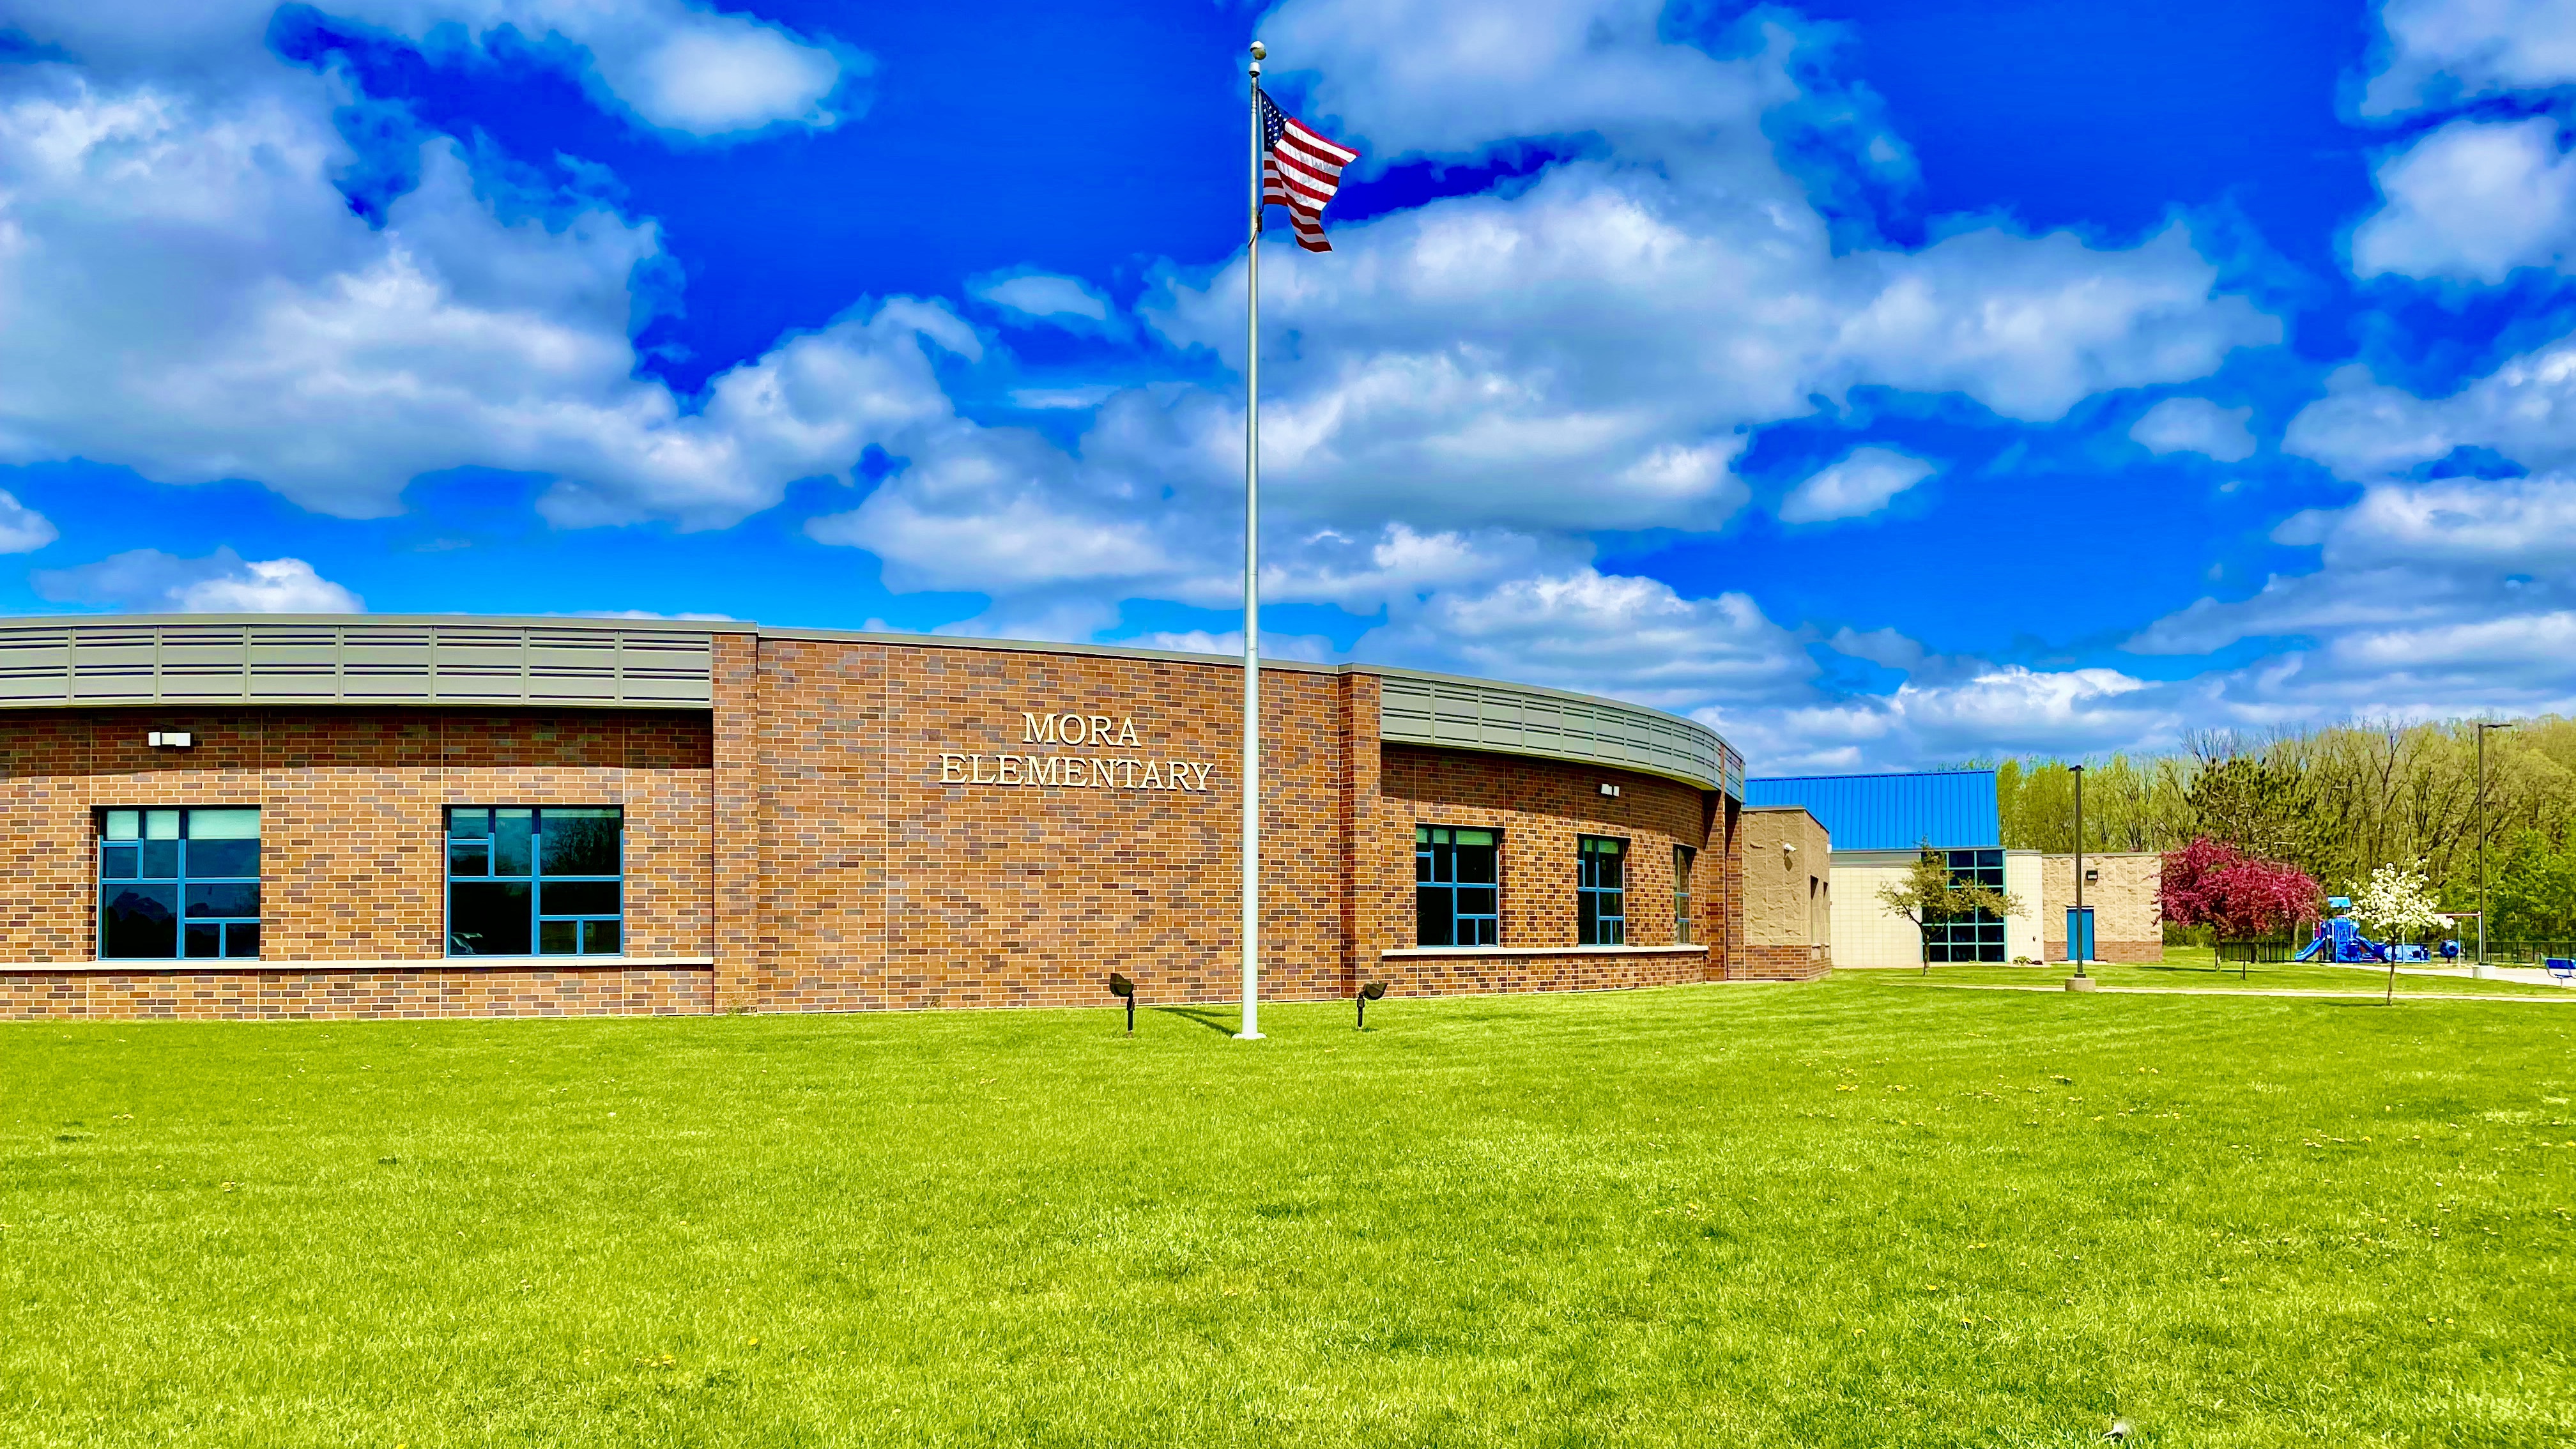 Picture of outside of school with flag waving, green grass, and blue sky